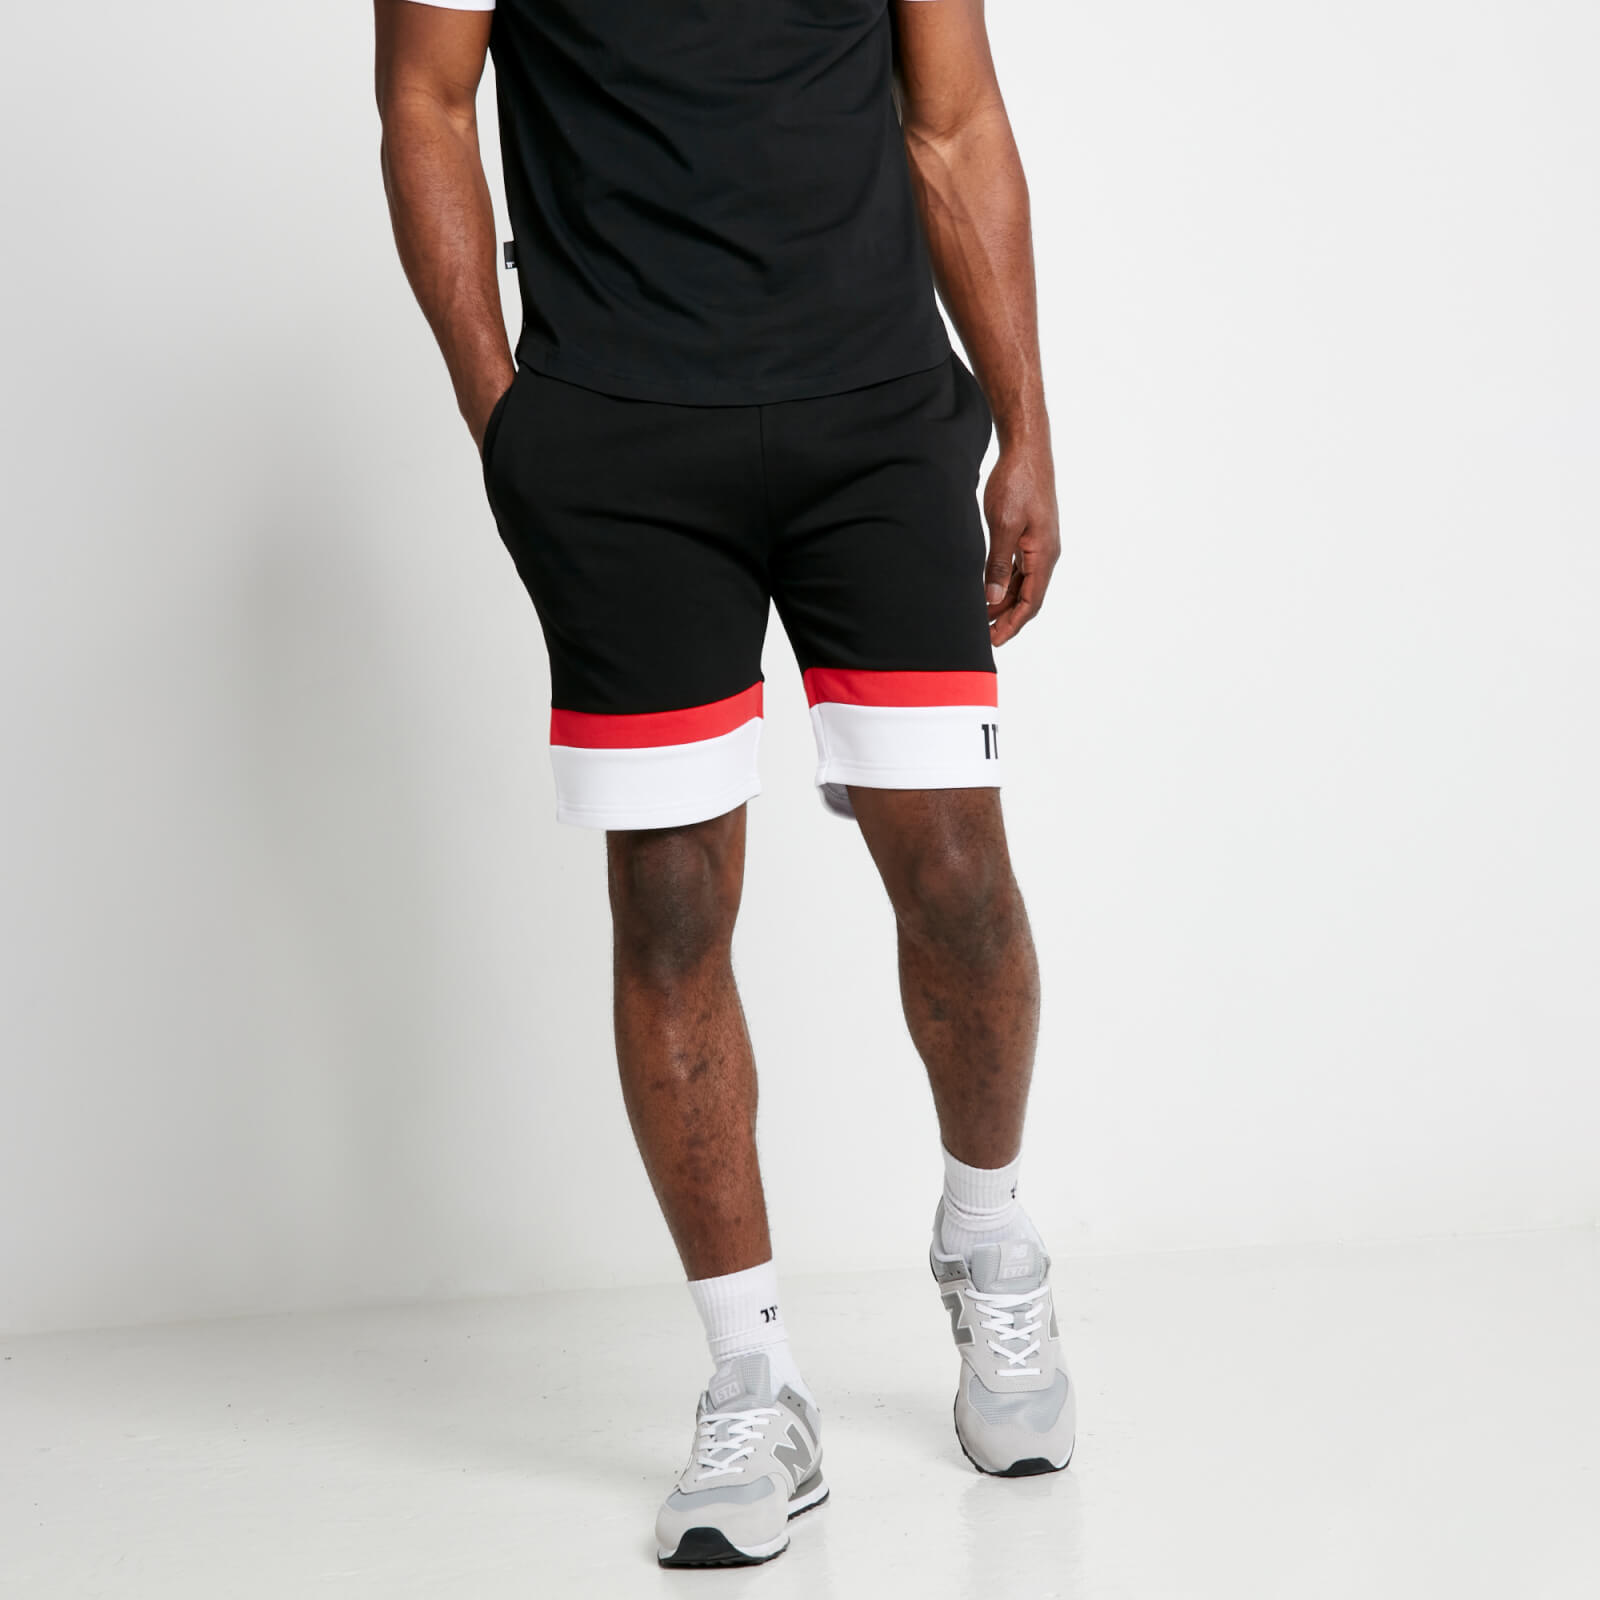 play hard shorts – black / white / fiery red - xs